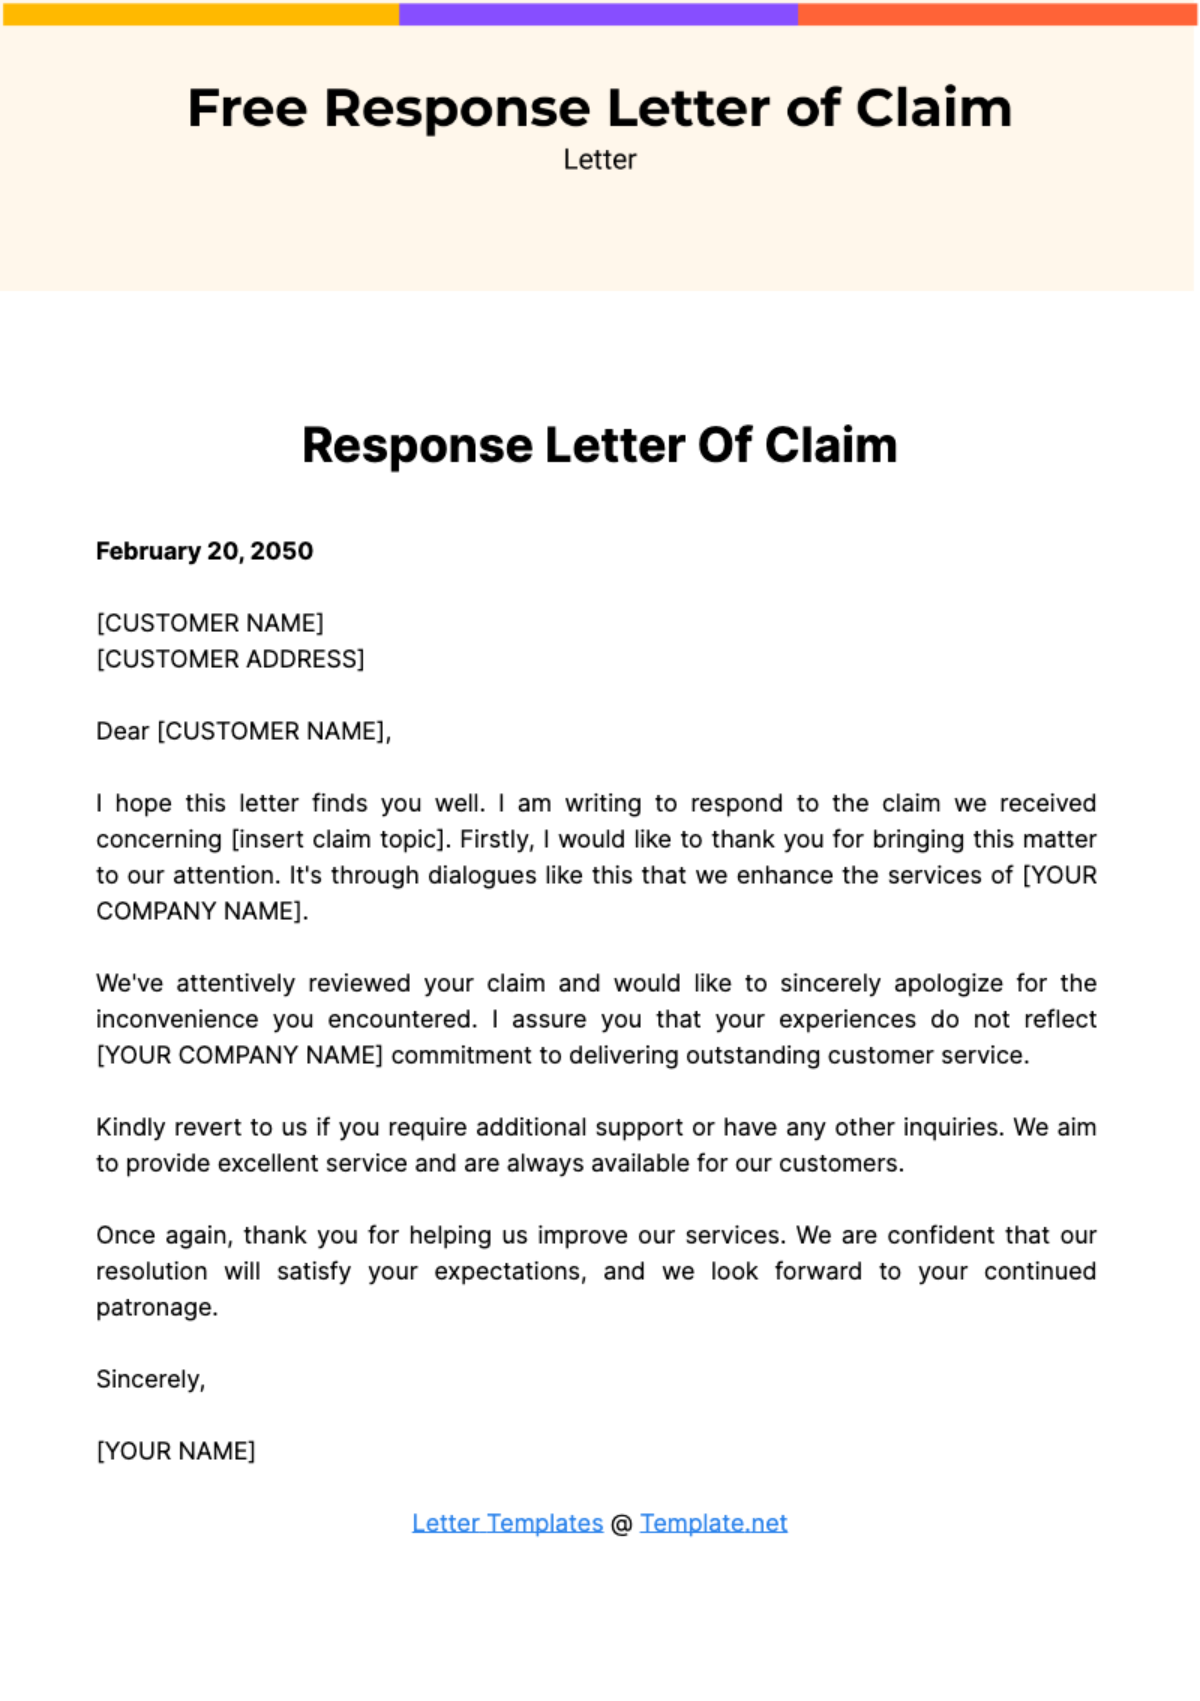 Free Response Letter of Claim Template